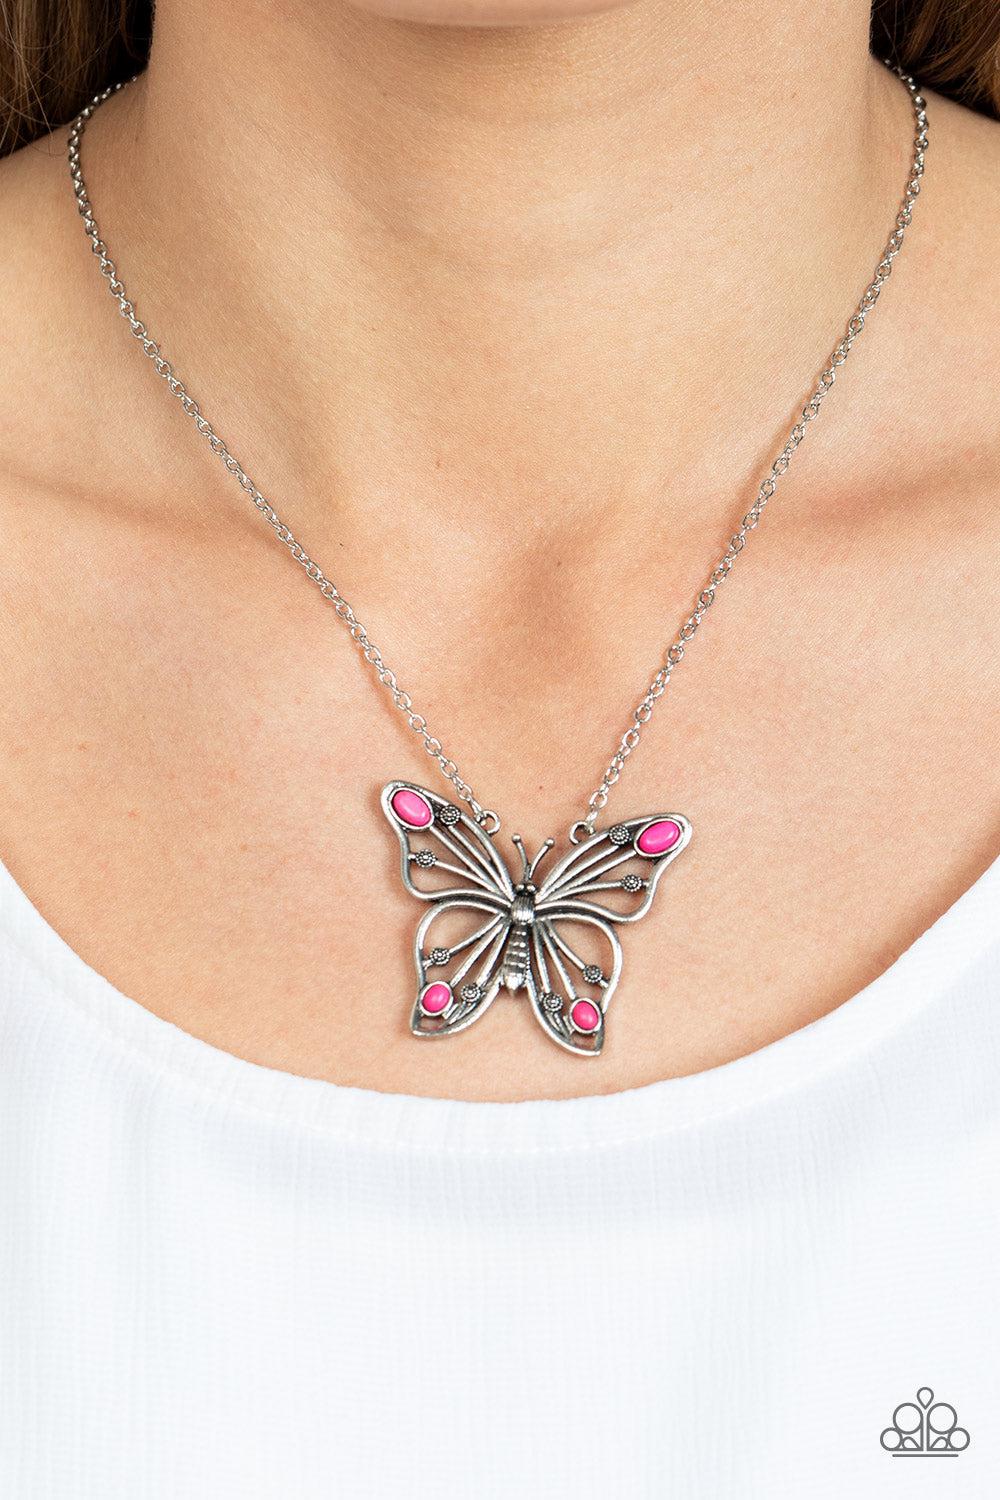 Badlands Butterfly Pink Stone Necklace - Paparazzi Accessories-on model - CarasShop.com - $5 Jewelry by Cara Jewels